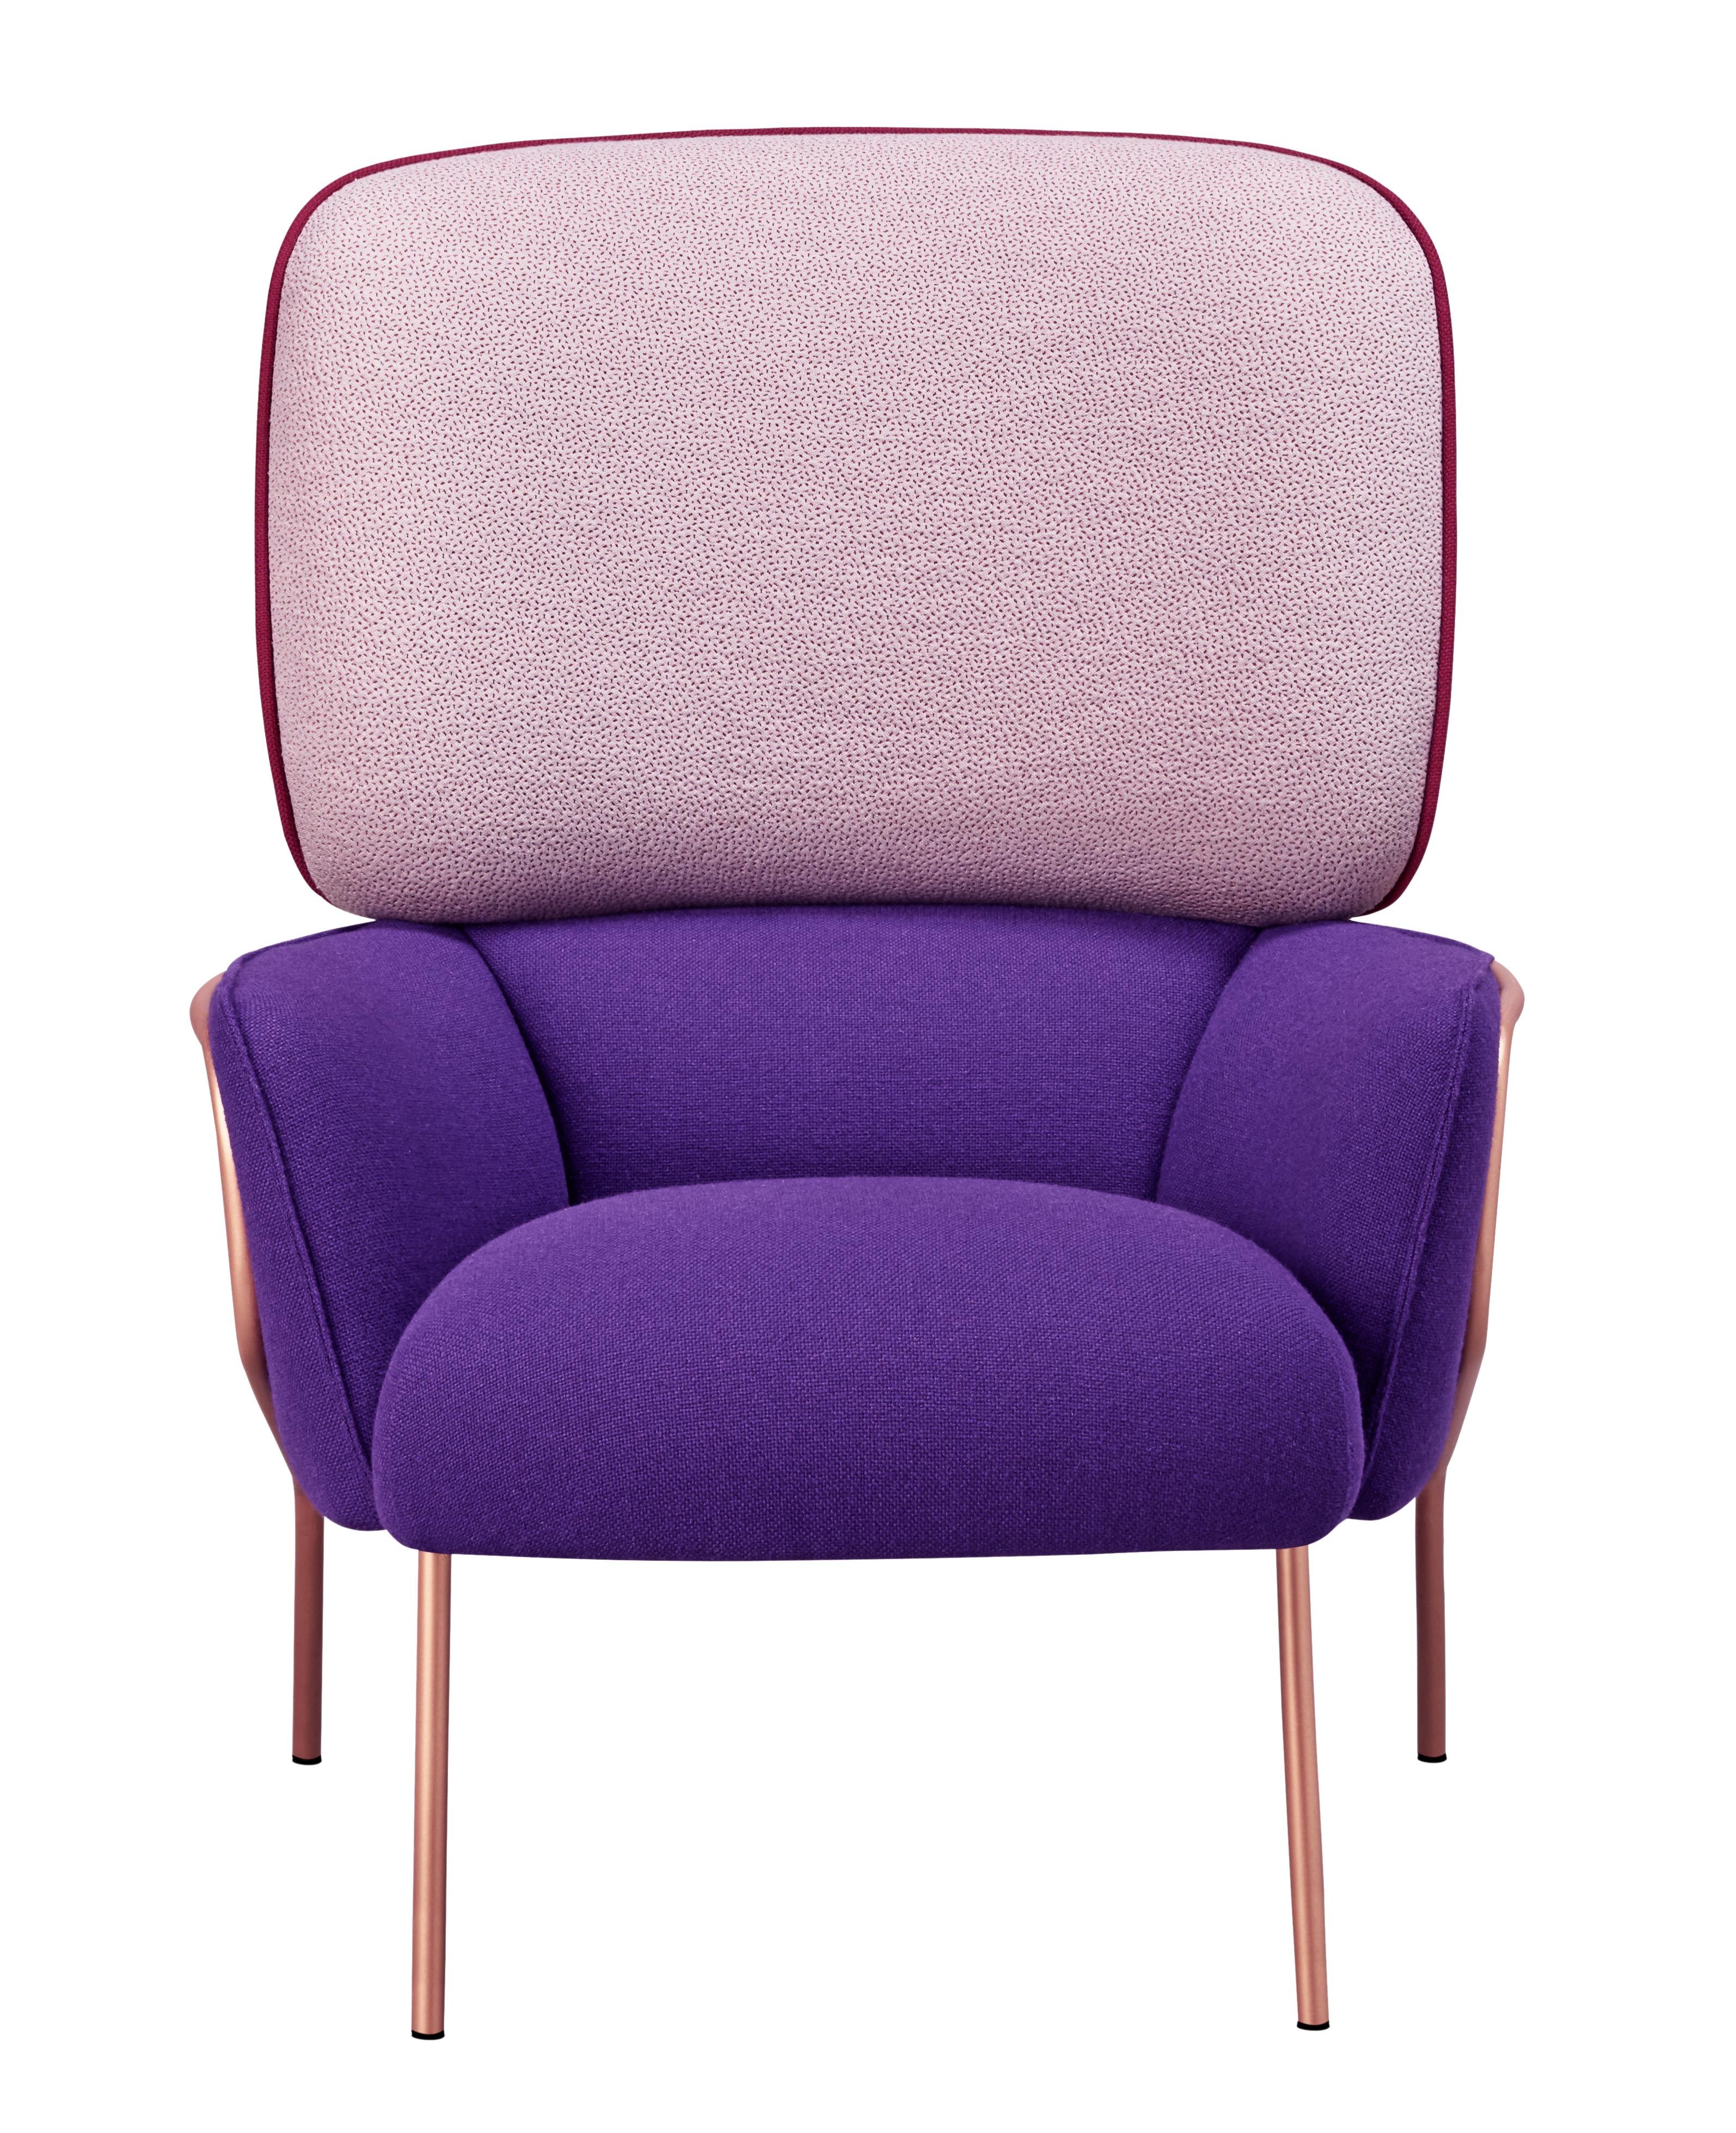 Pair of cotton armchairs, purple by Eli Gutiérrez
Dimensions: W 78, D 90, H 104, Seat 43
Materials: Pinewood structure reinforced with plywood and tablex
Foam CMHR (high resilience and flame retardant) for all our cushion filling systems
Painted